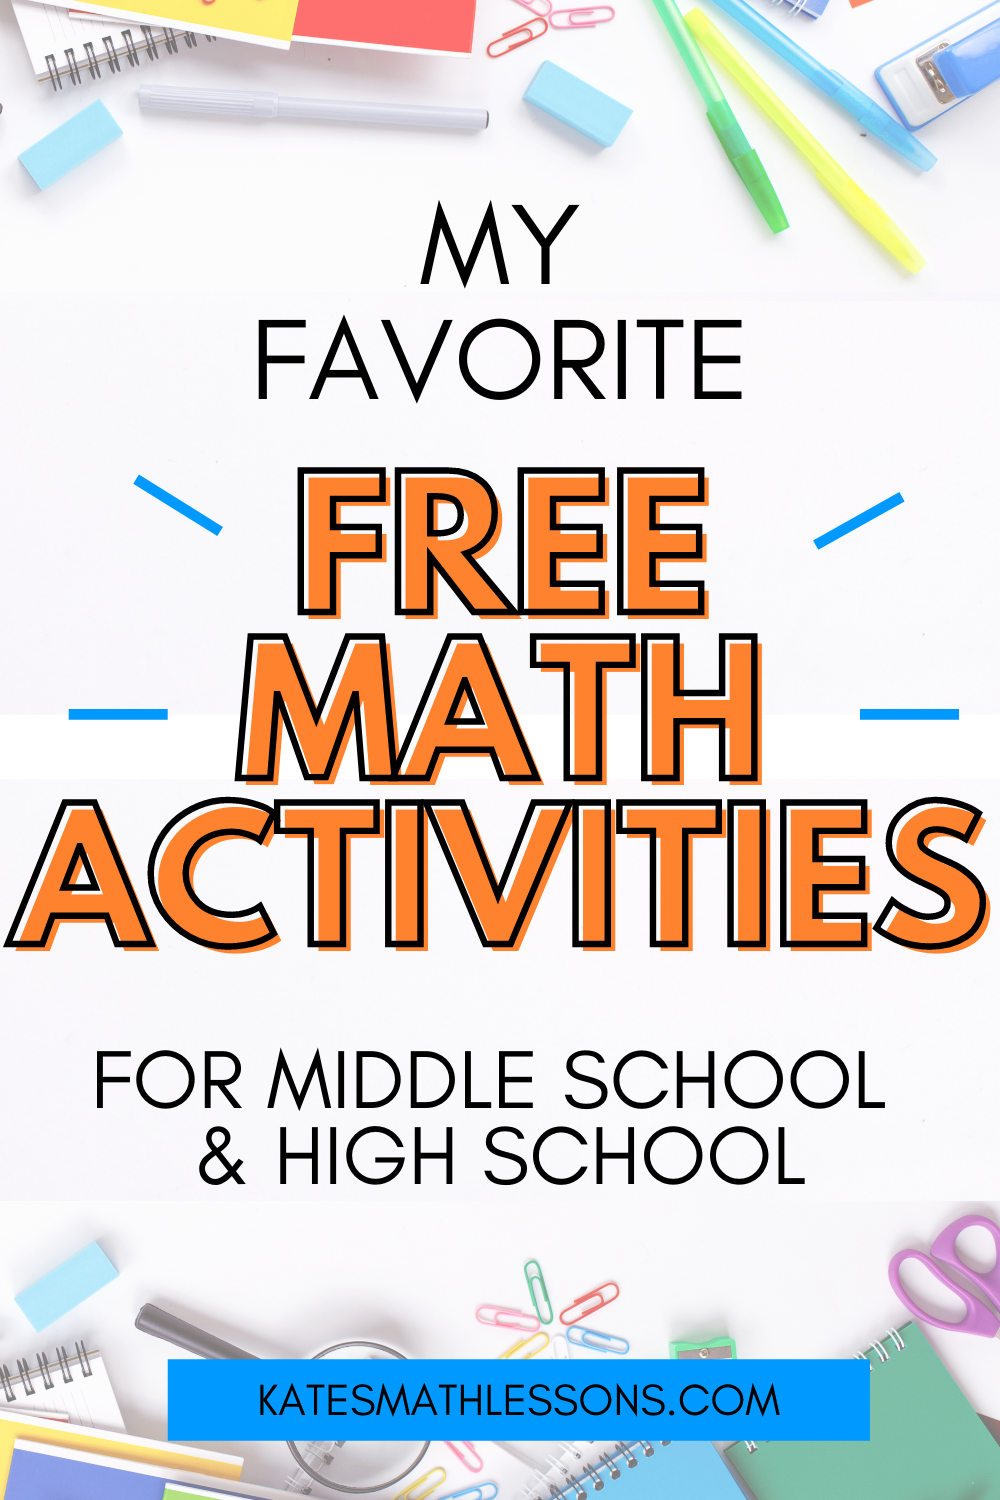 Free Math Resources for Middle School and High School Pre-Algebra Algebra & Geometry Resources Worksheets